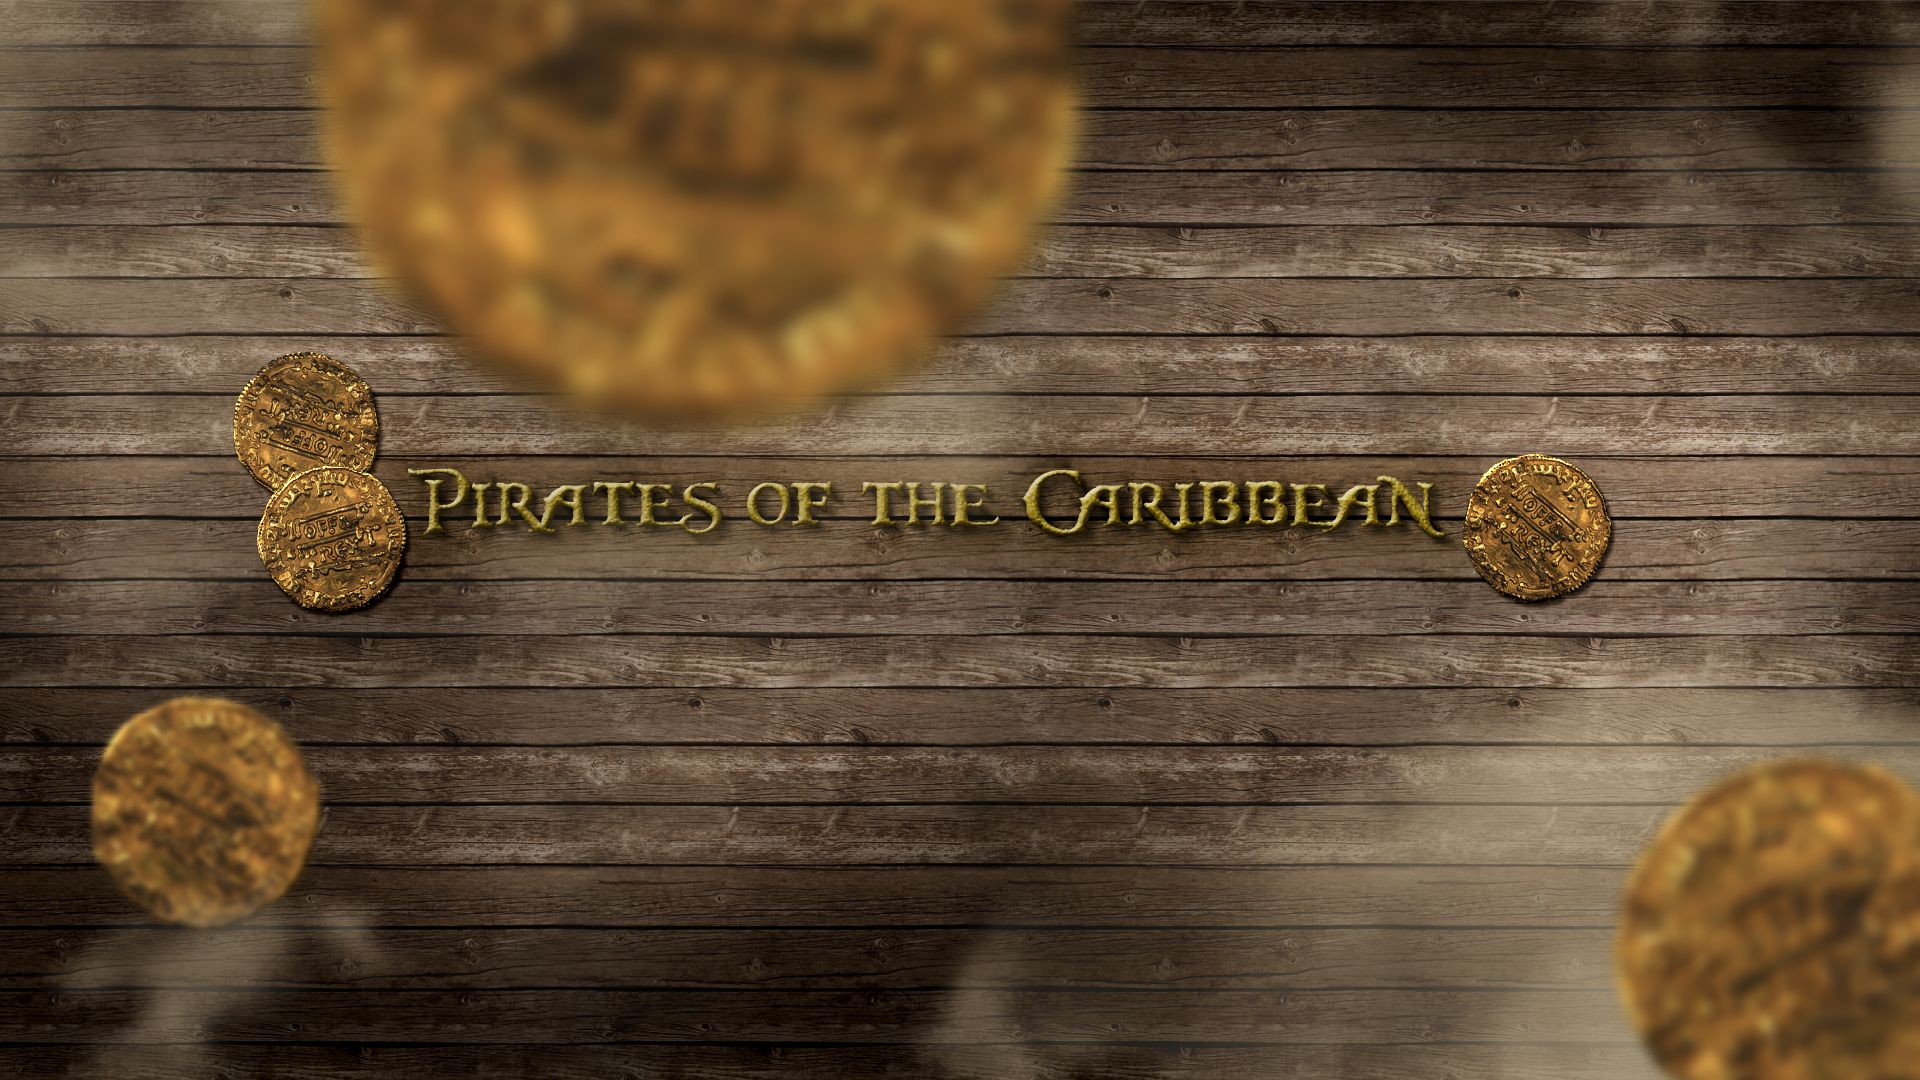 Pirates Of The Caribbean Wallpaper Image With